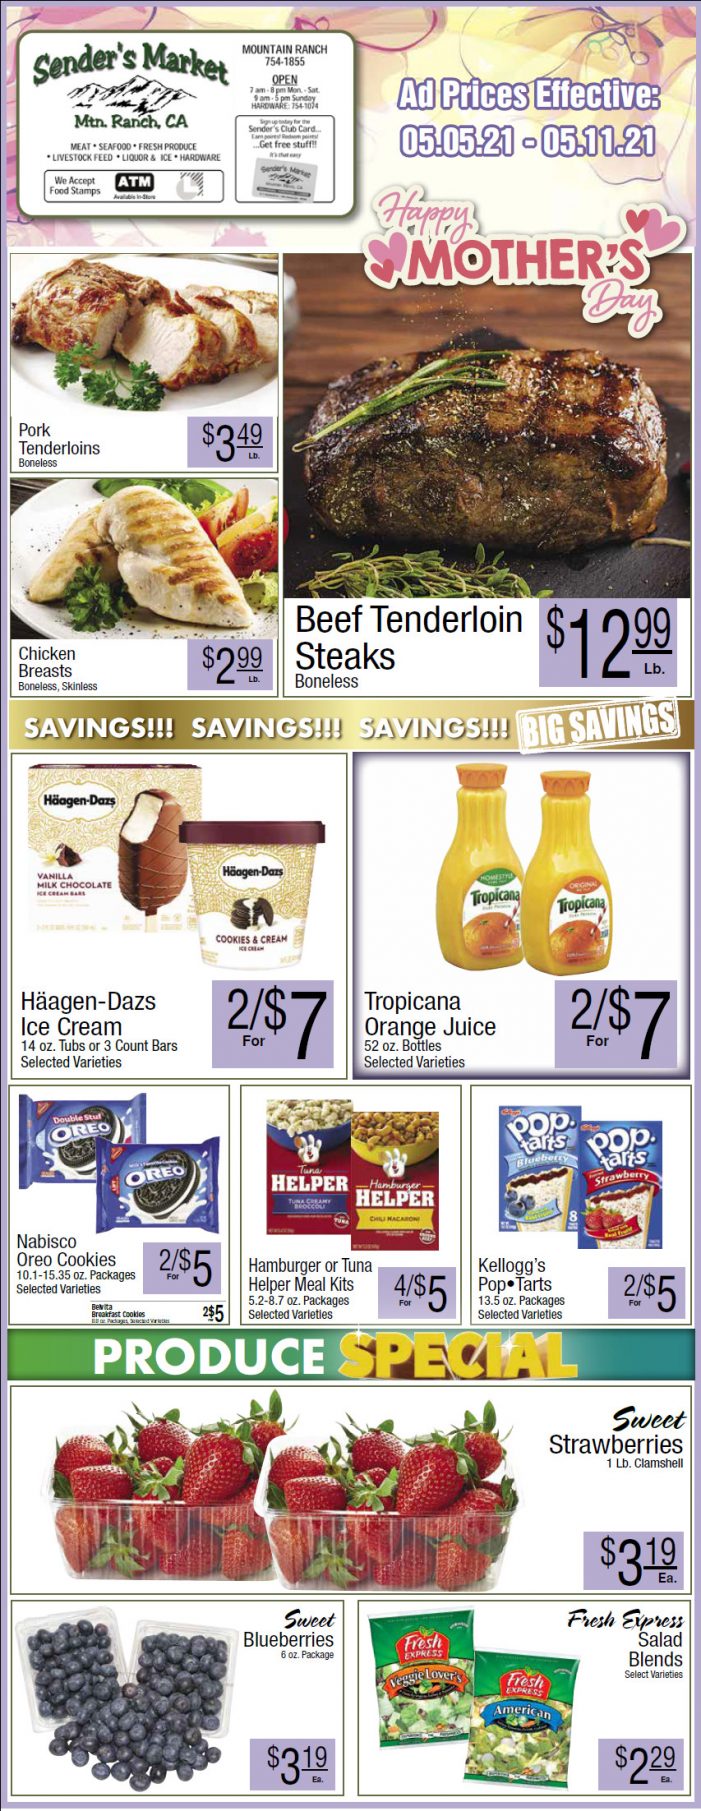 Sender’s Market’s Weekly Ad & Grocery Specials Through May 11th.  Shop Local & Save!